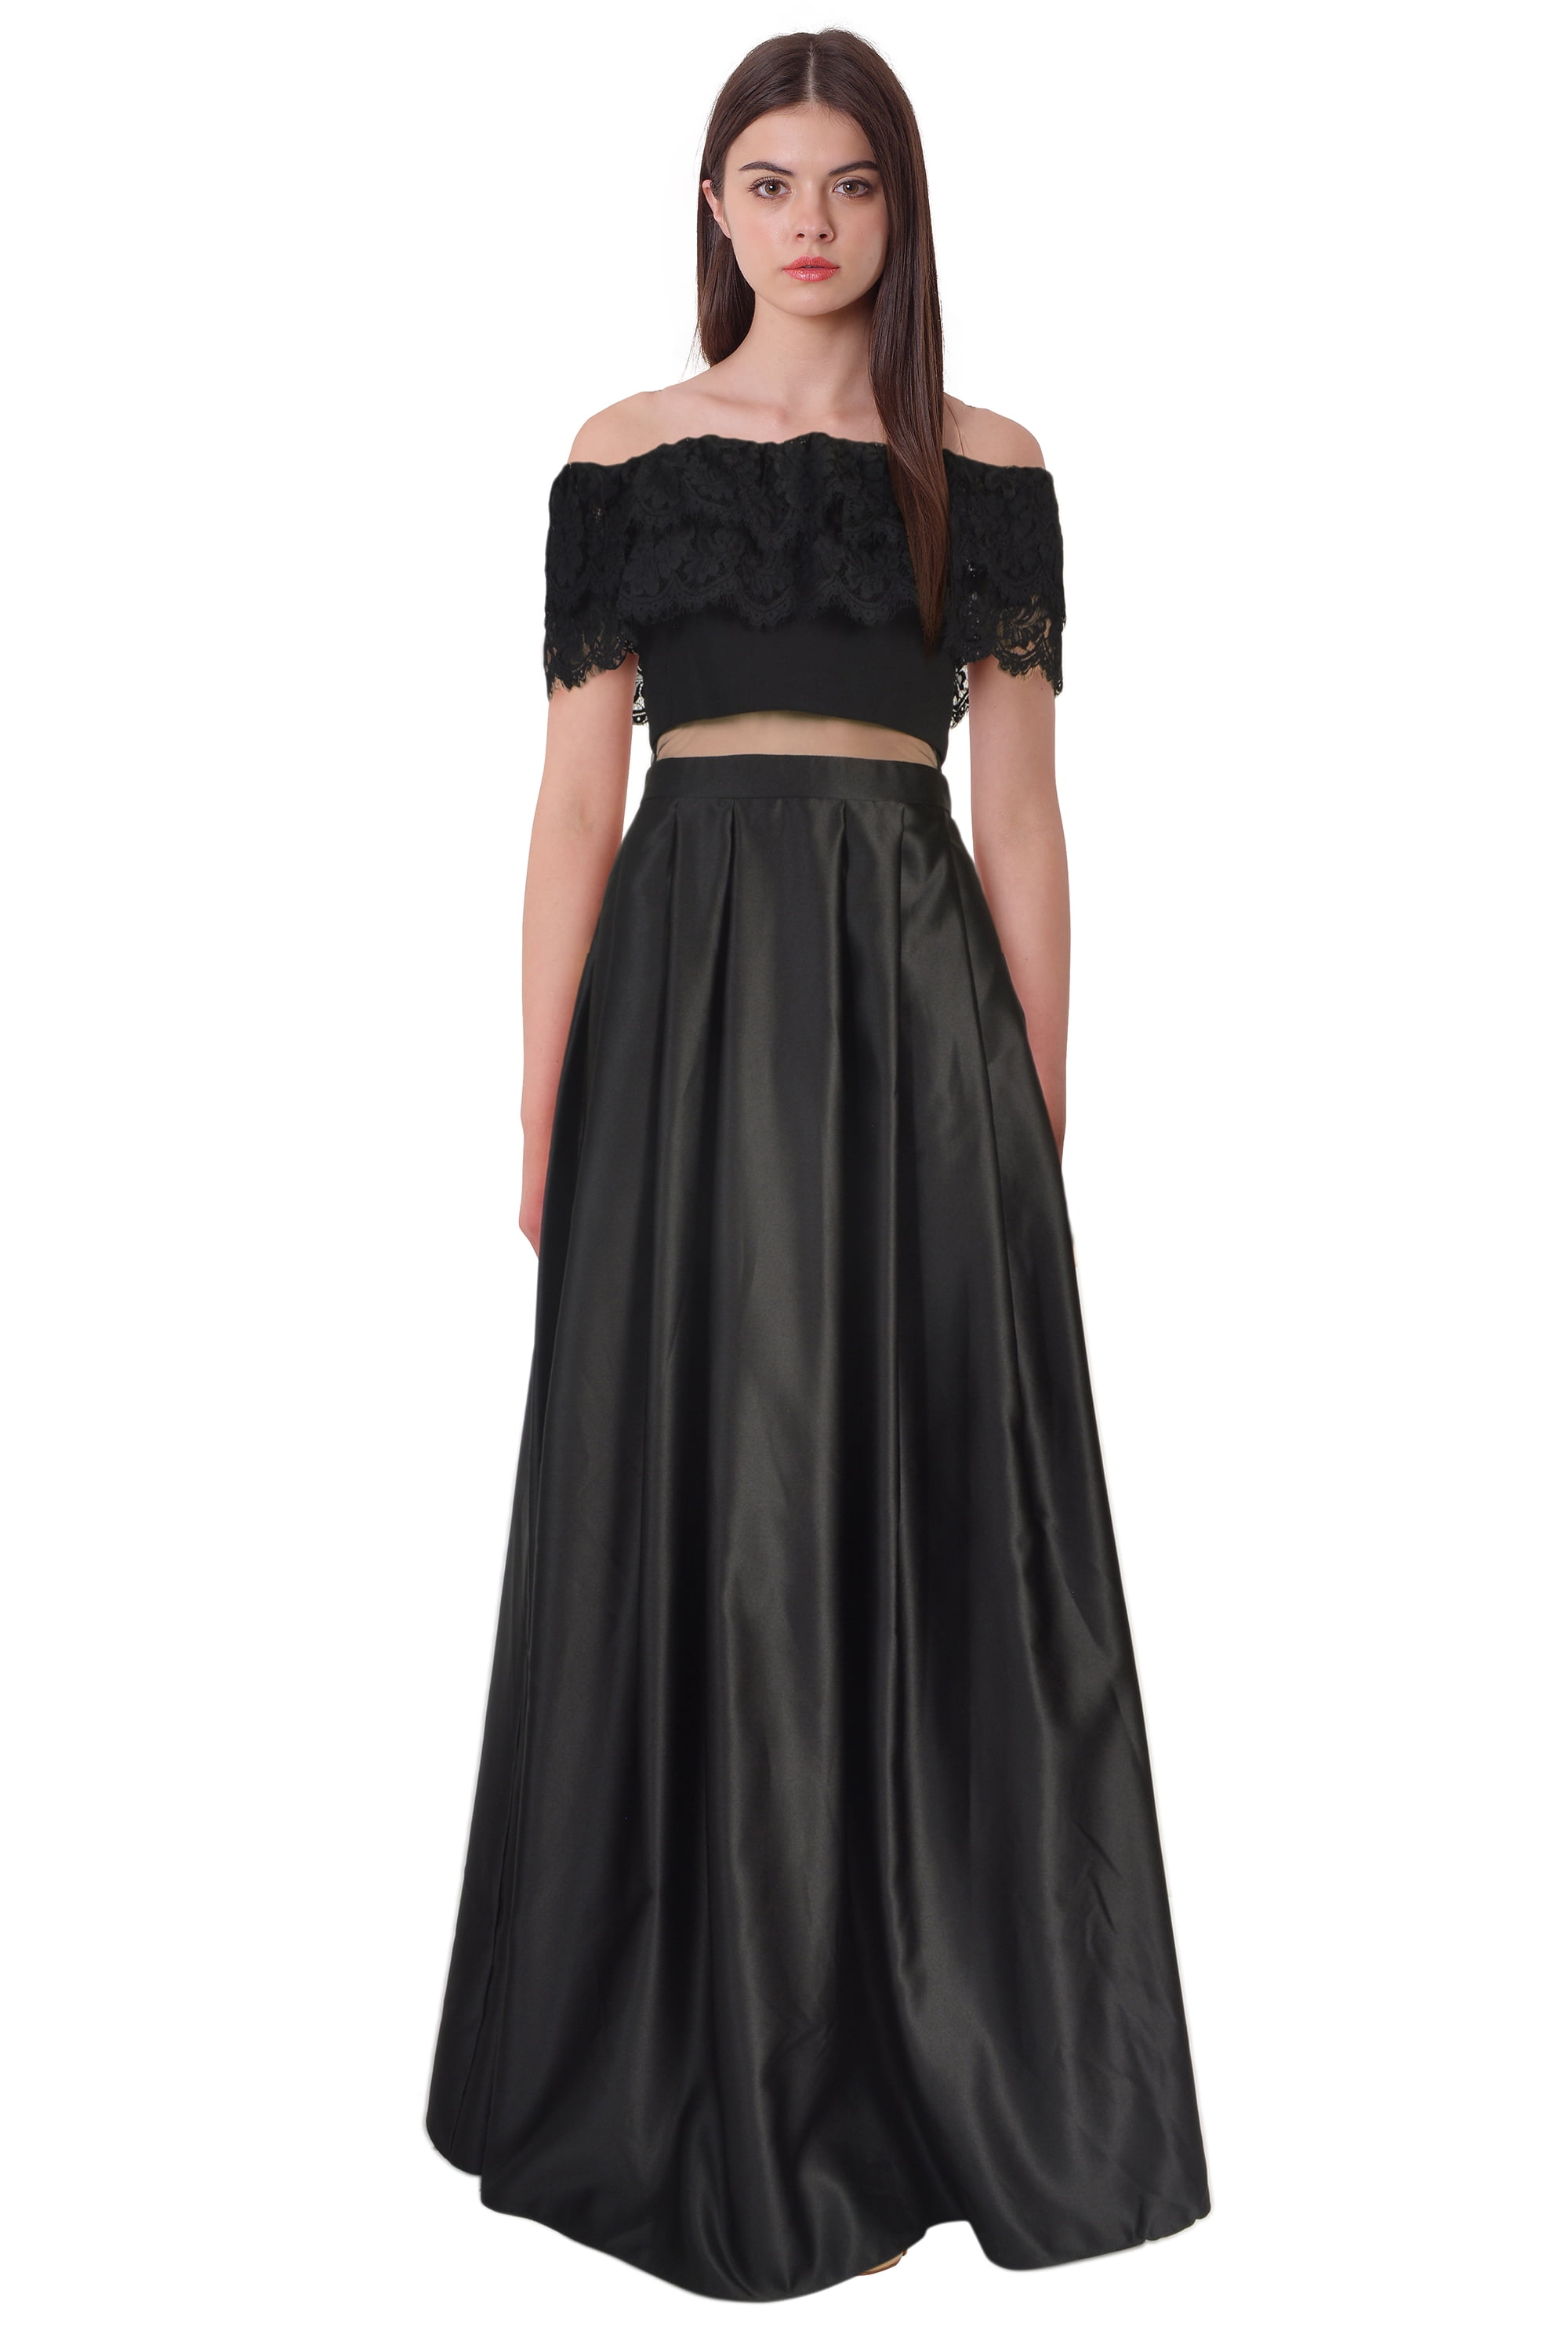 Betsy & Adam - Betsy & Adam Off Shoulder Lace Mesh Inset Evening Gown ...